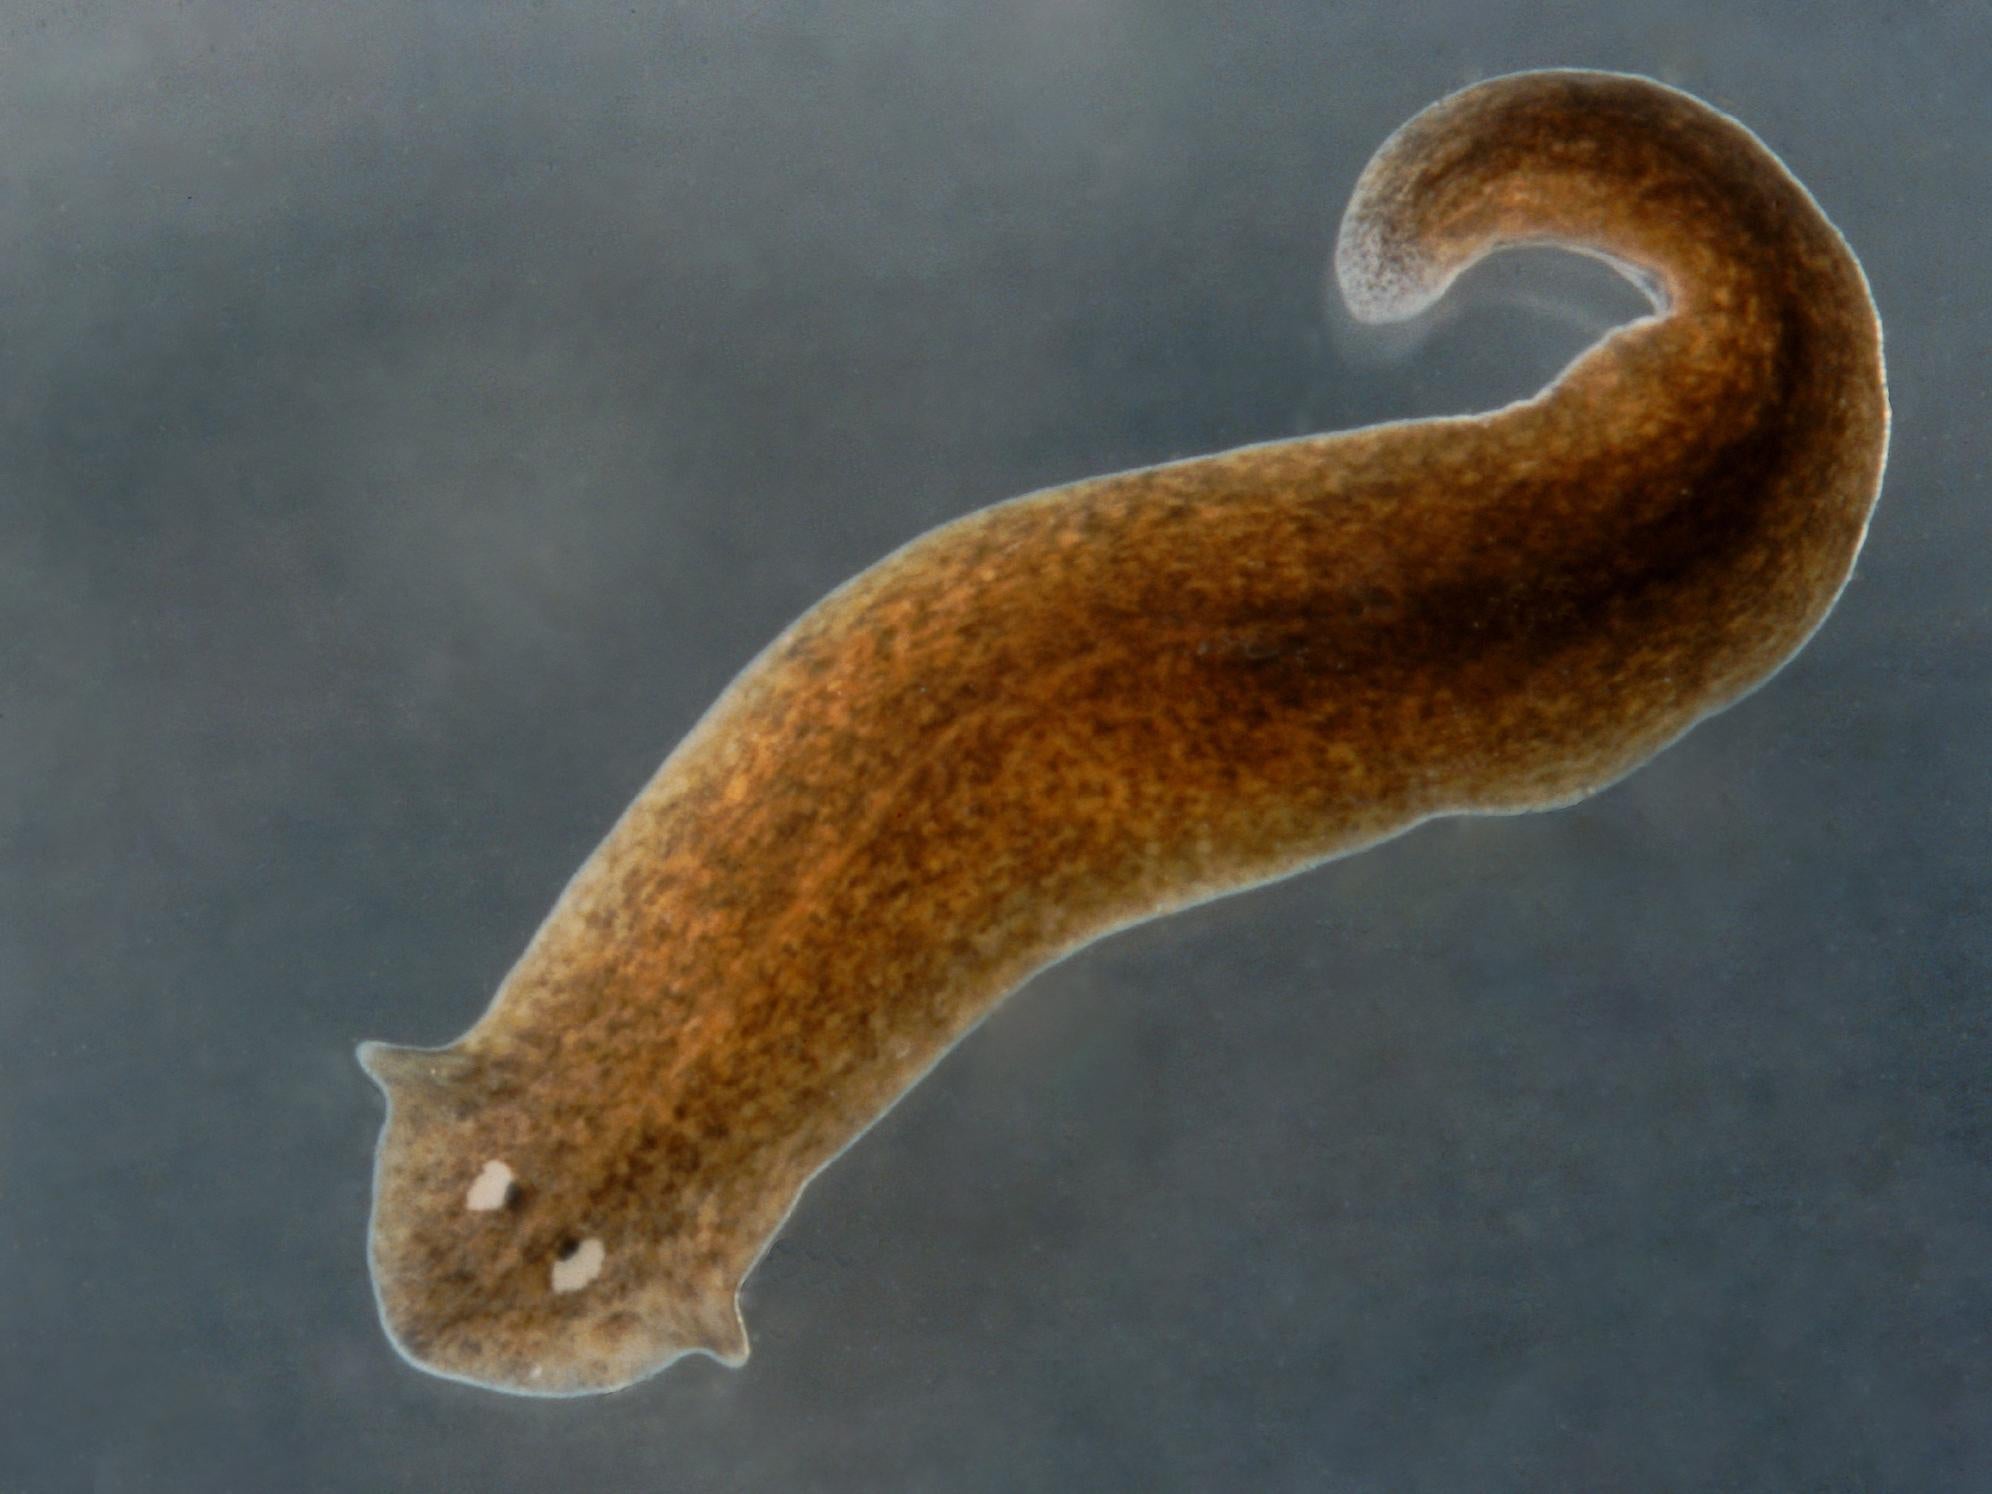 Planarian flatworms are able to regrow severed heads and other body parts